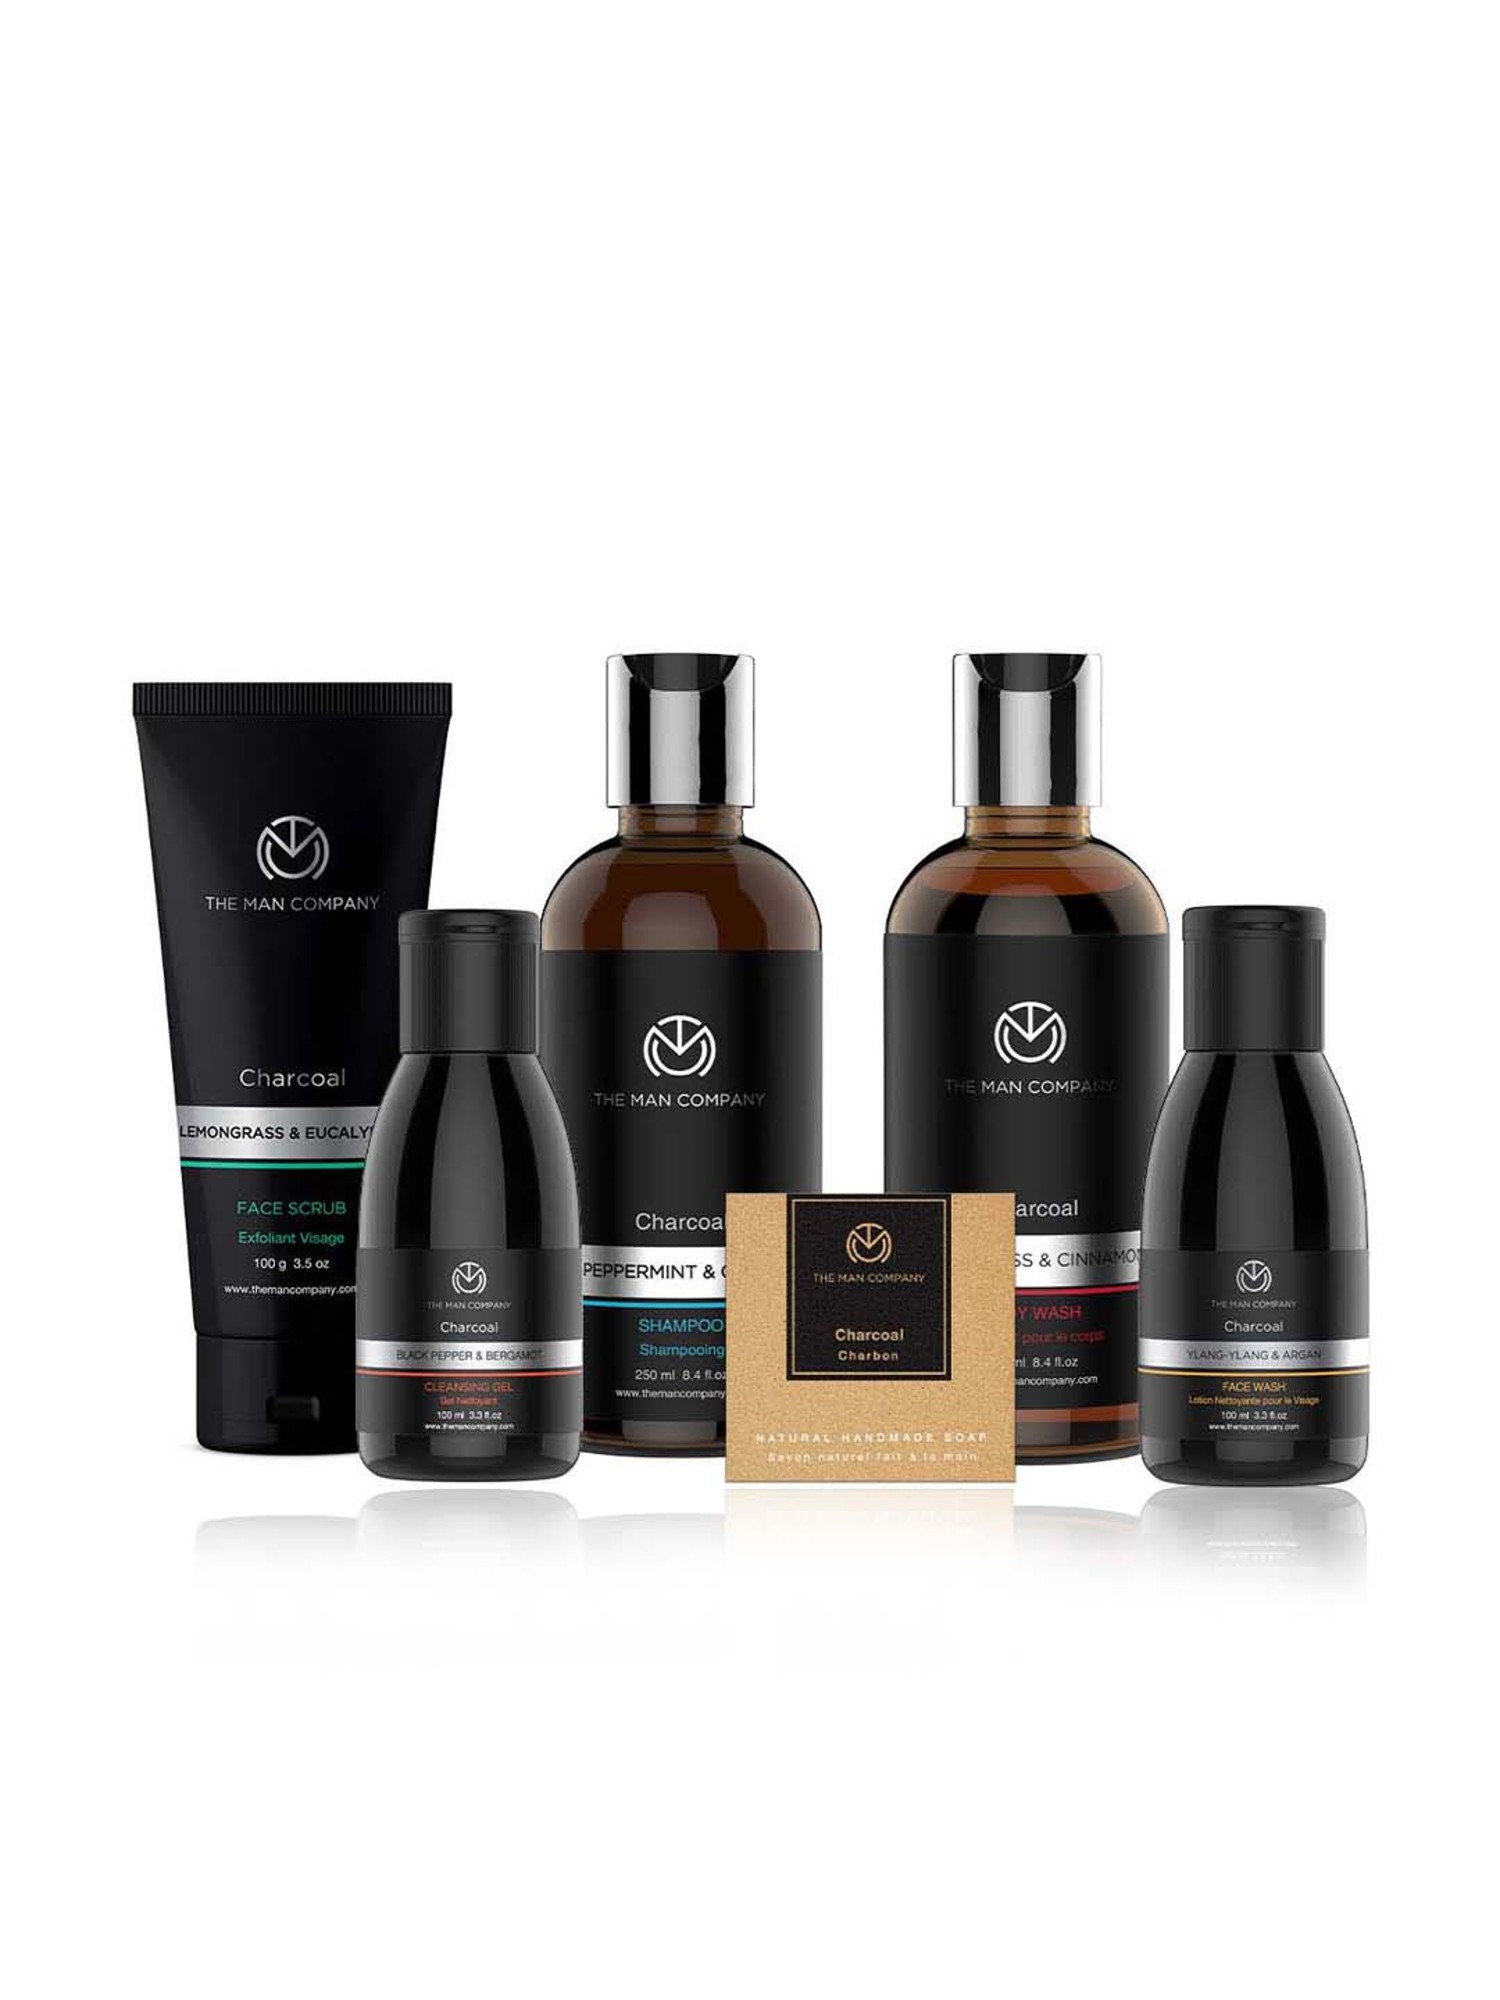 Buy The Man Company Charcoal Grooming Kit (Set of 6) - 925 ml Online At  Best Price @ Tata CLiQ